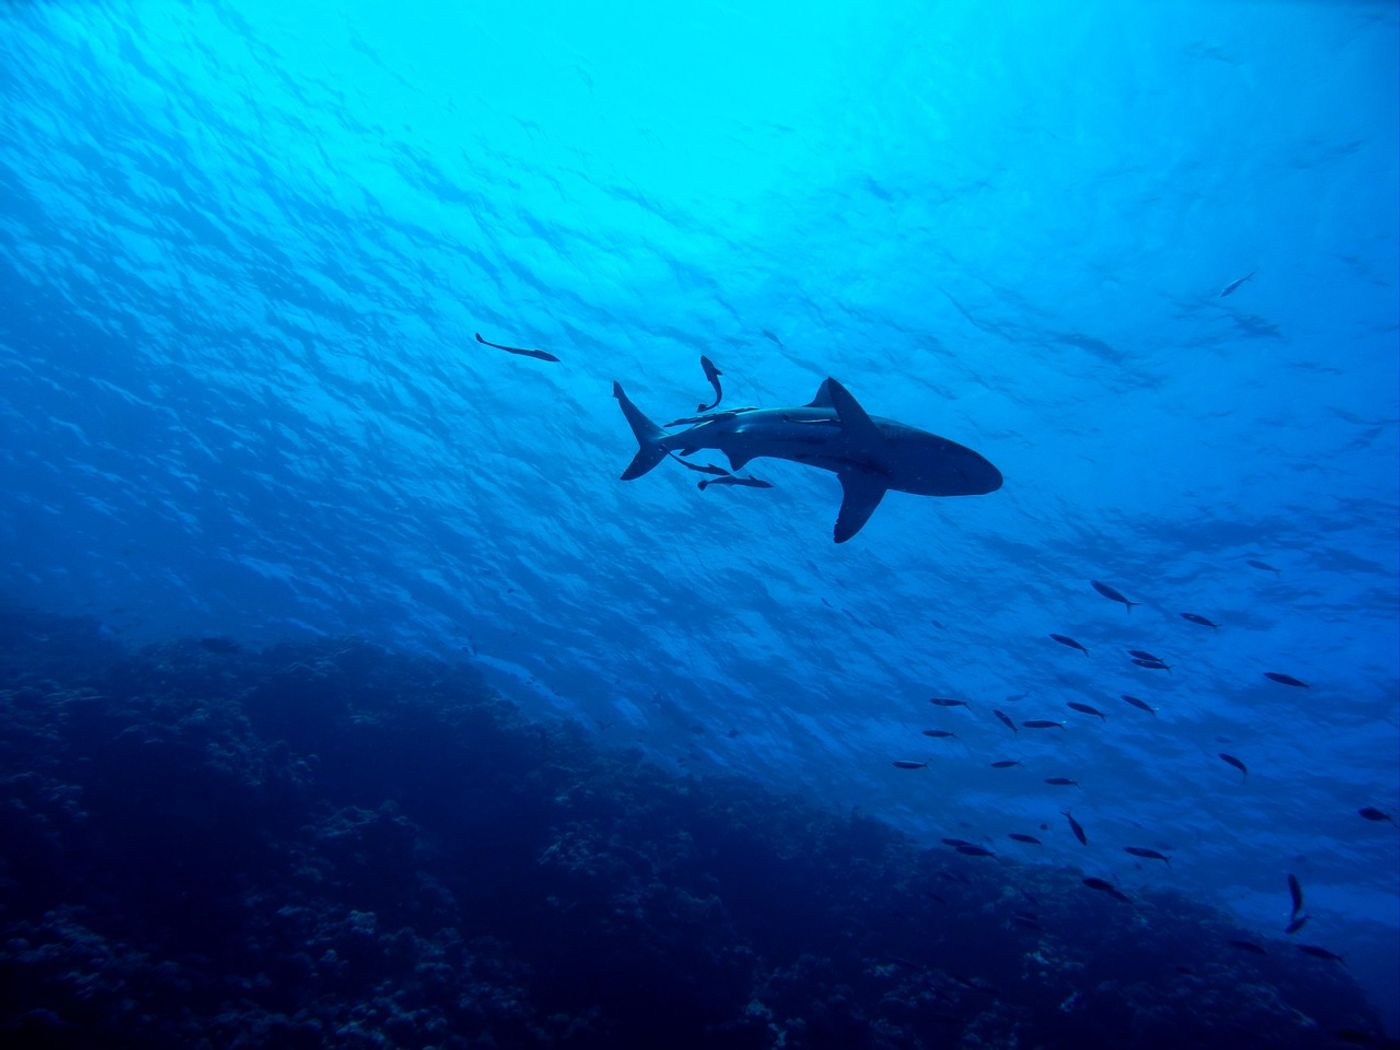 Researchers noticed fewer sharks in the Chagos archipelago than they originally expected.